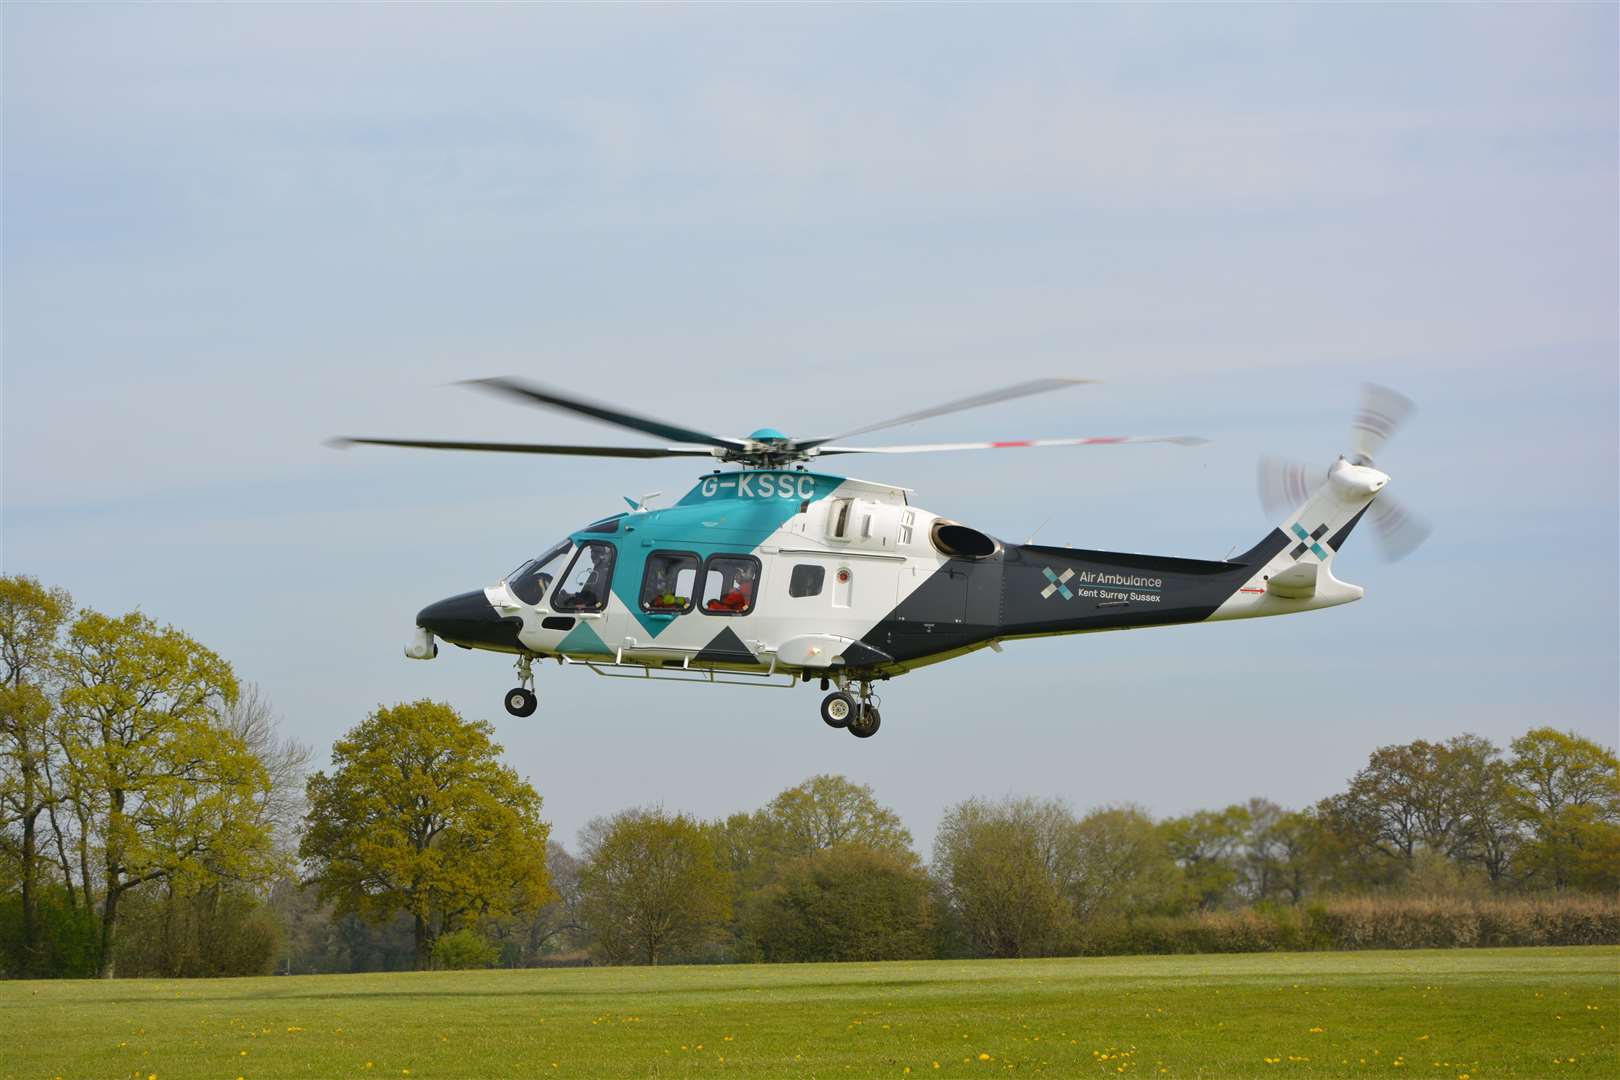 Air ambulance crews were called to the scene of the crash